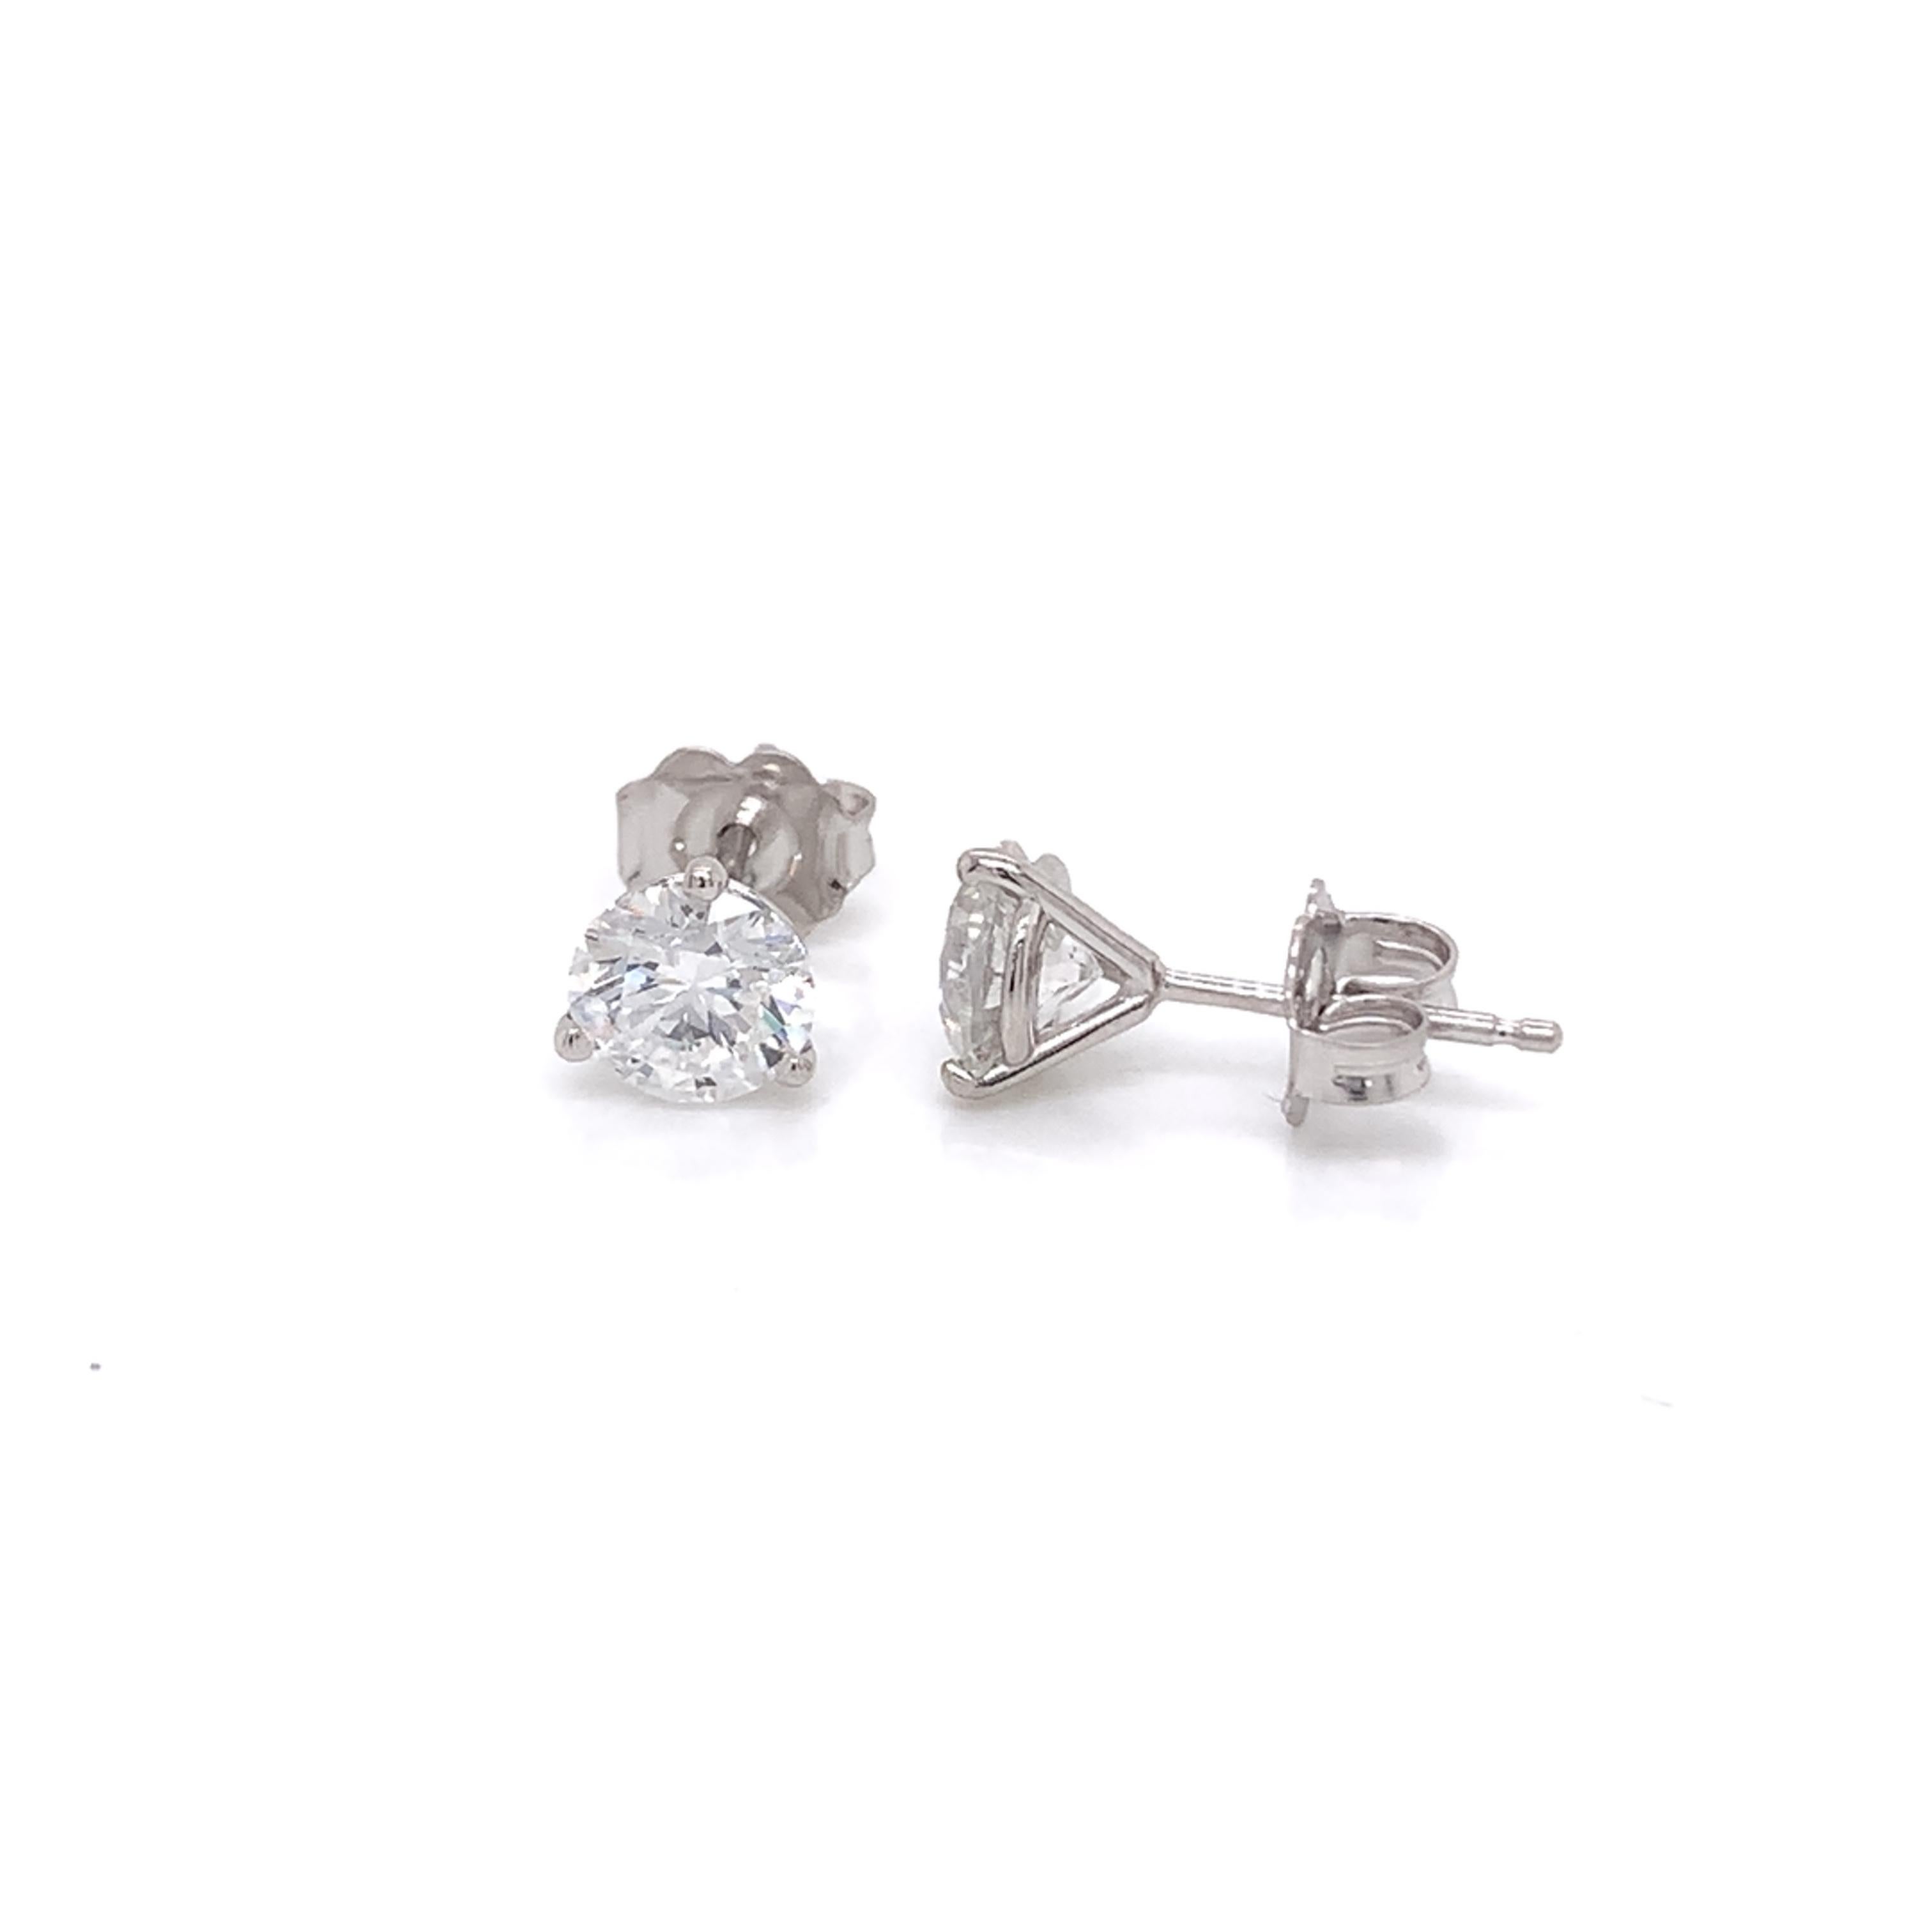 Diamond Stud Earrings made with real/natural brilliant cut diamonds. Total Diamond Weight: 1.43 carats. Diamond Quantity: 2 (round diamonds). Color: F-G Clarity: SI2-SI3. Set on a 3 prong mounting in 18 karat white gold, push-back setting.